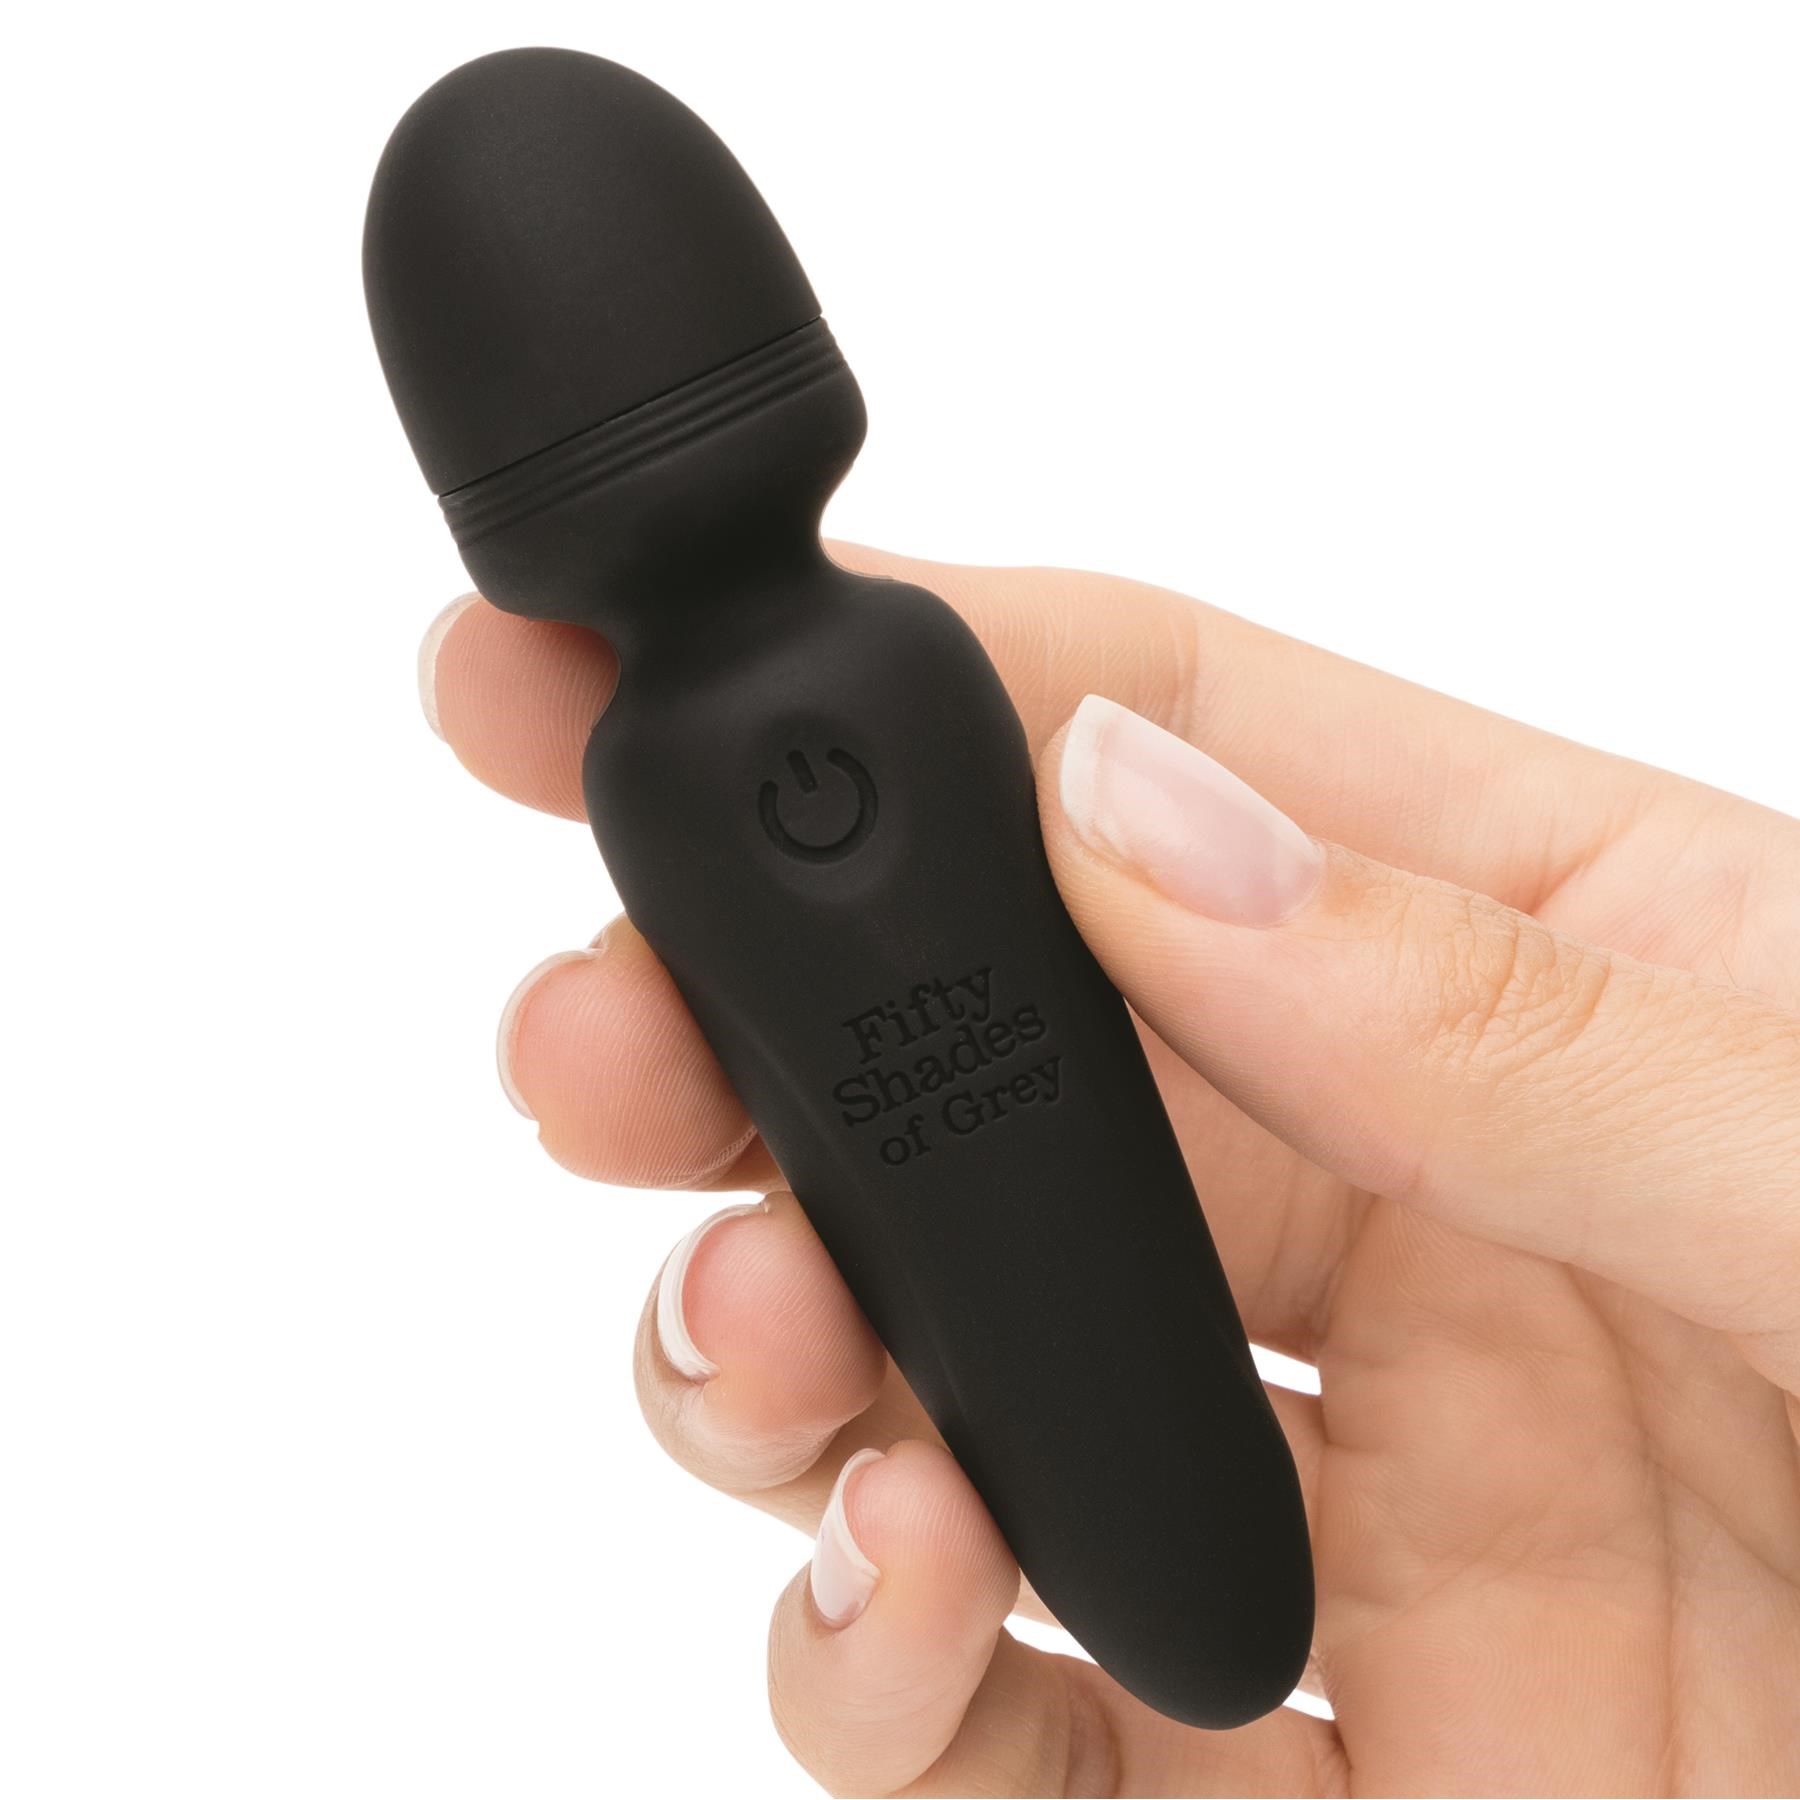 Fifty Shades of Grey Sensation Mini Wand Massager Hand Shot to Show Size